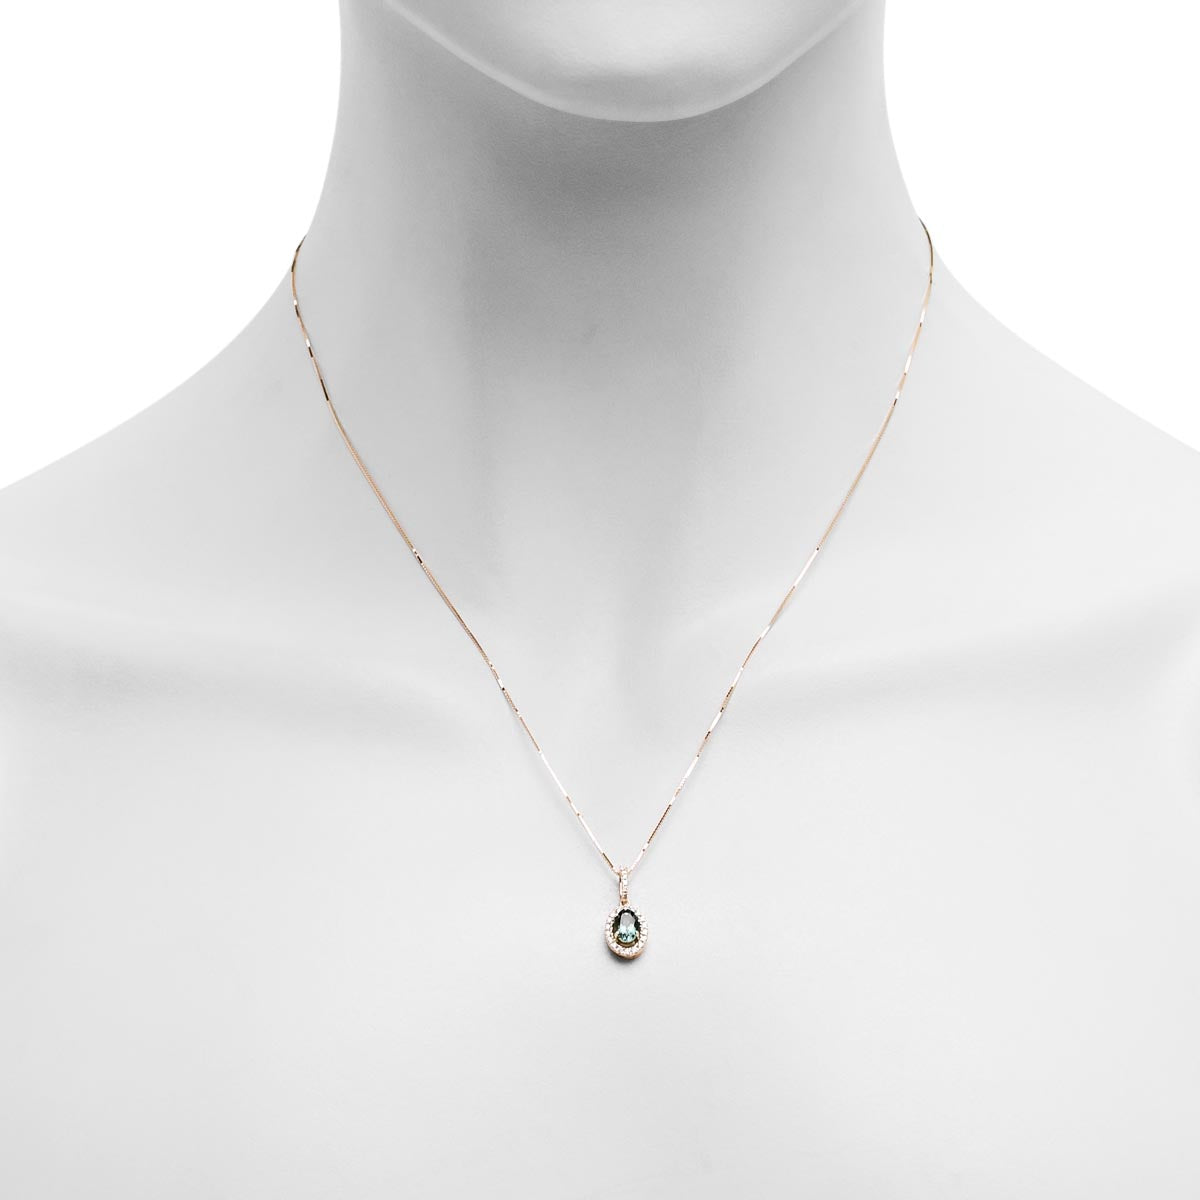 Maine Indicolite Tourmaline Necklace in 14kt Yellow Gold with Diamonds (1/10ct tw)